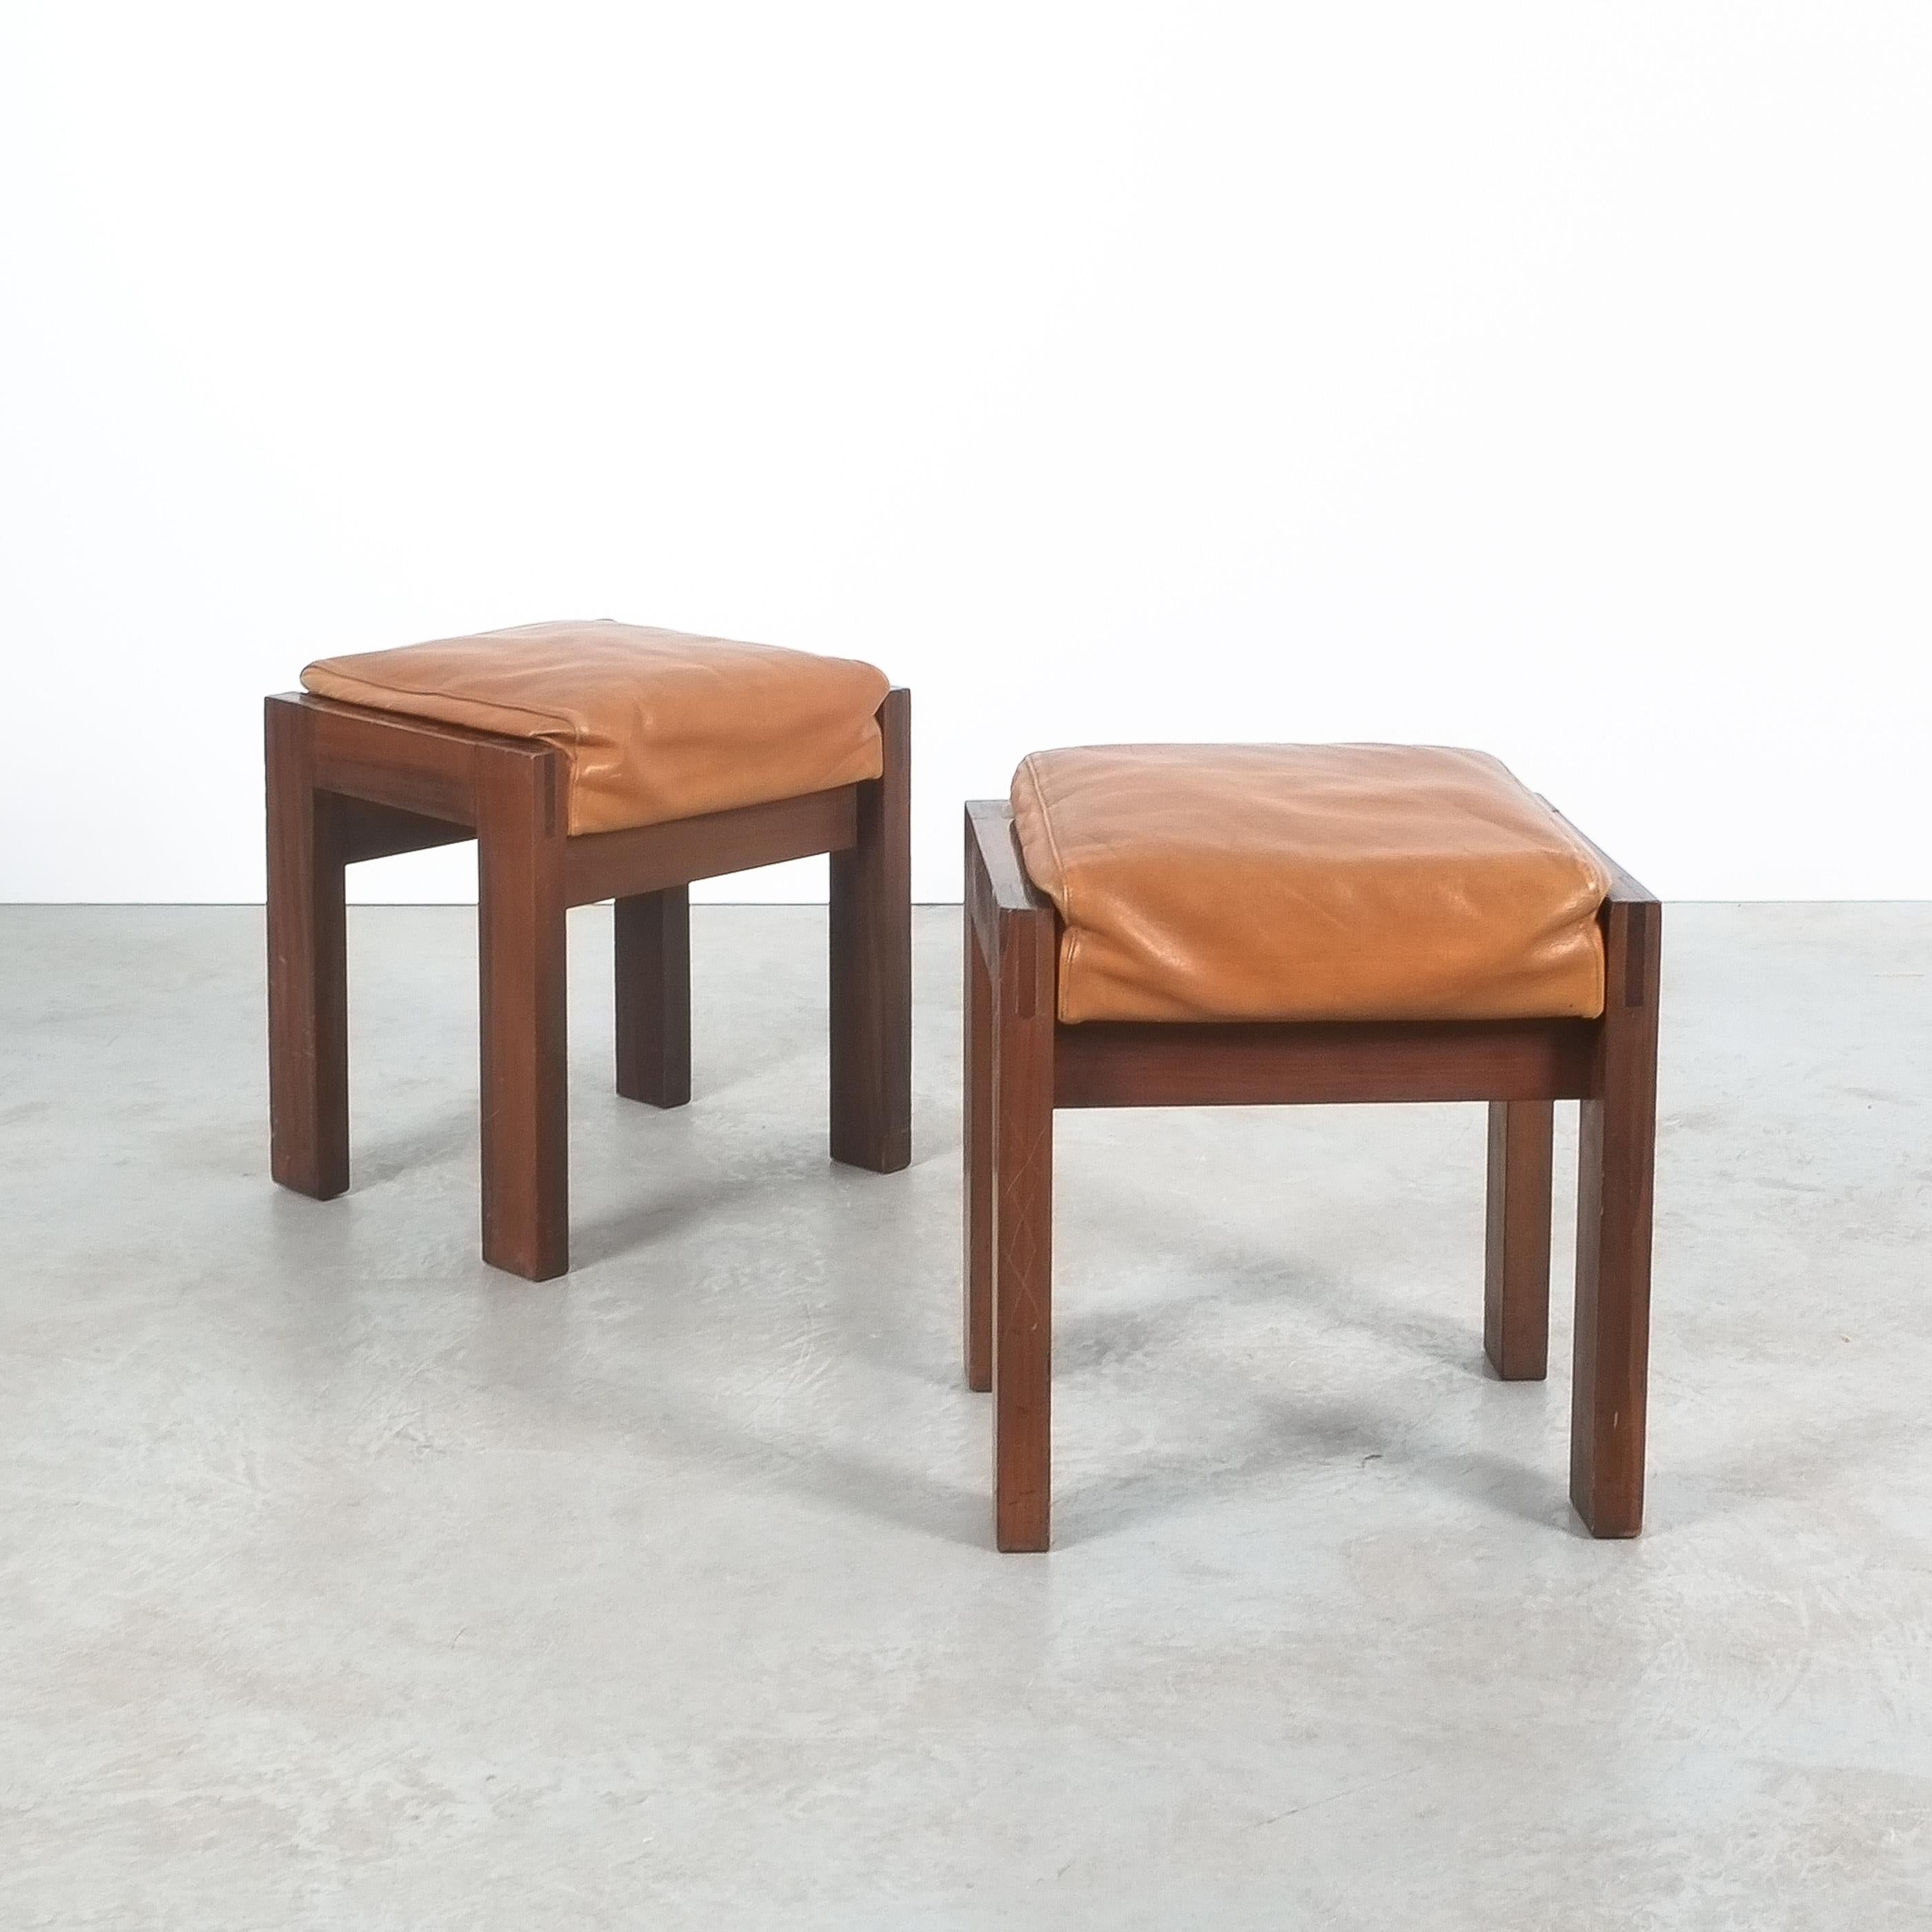 Maple and Leather Midcentury Wood Stools, Italy, 1950 For Sale 3